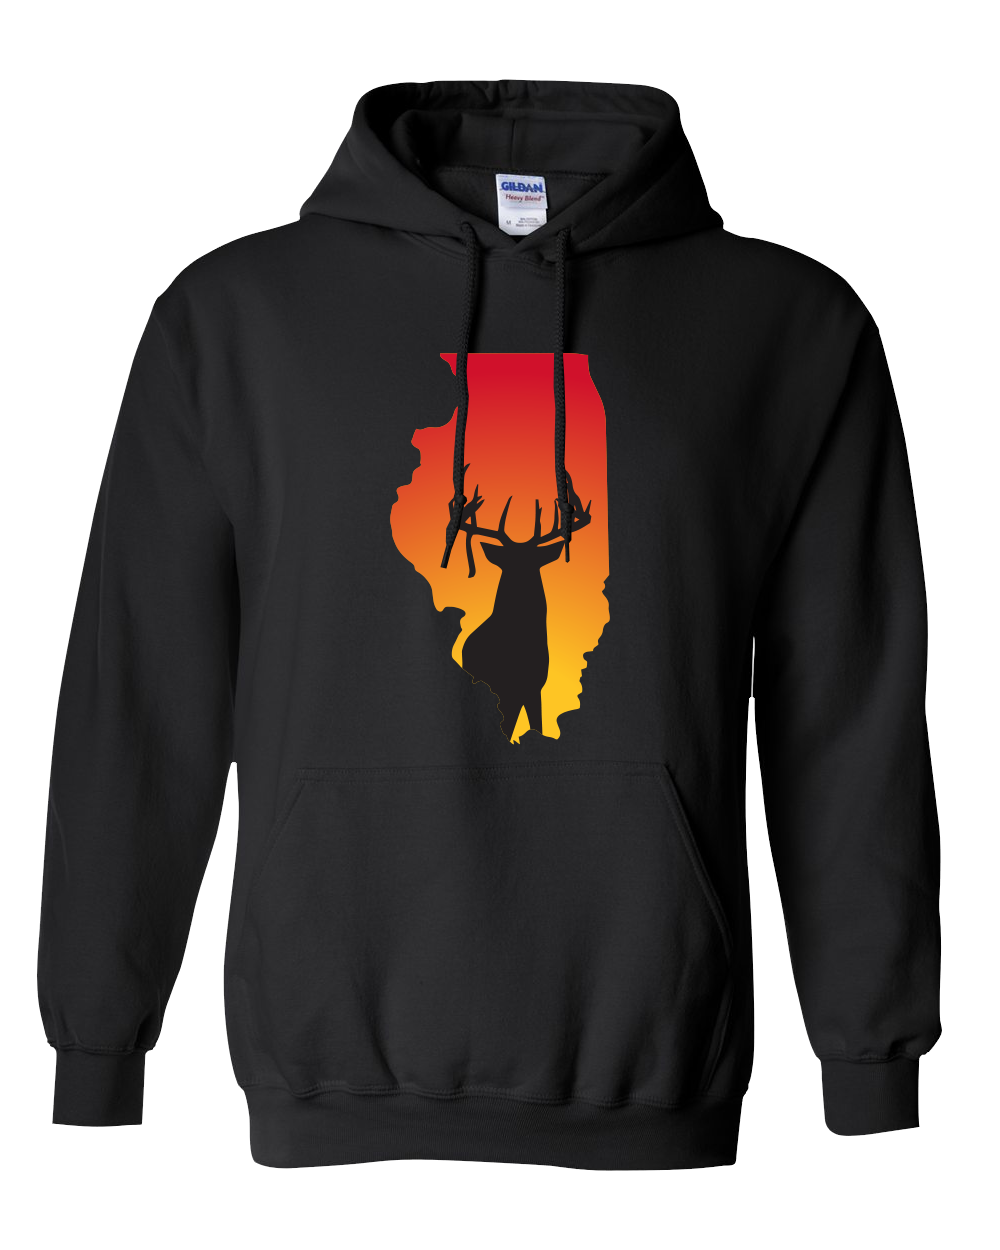 Pullover Hooded Sweatshirt Illinois Black Whitetail Deer Vibrant Design High Quality Tight Knit Ring Spun Low Maintenance Cotton Printed With The Newest Available Color Transfer Technology